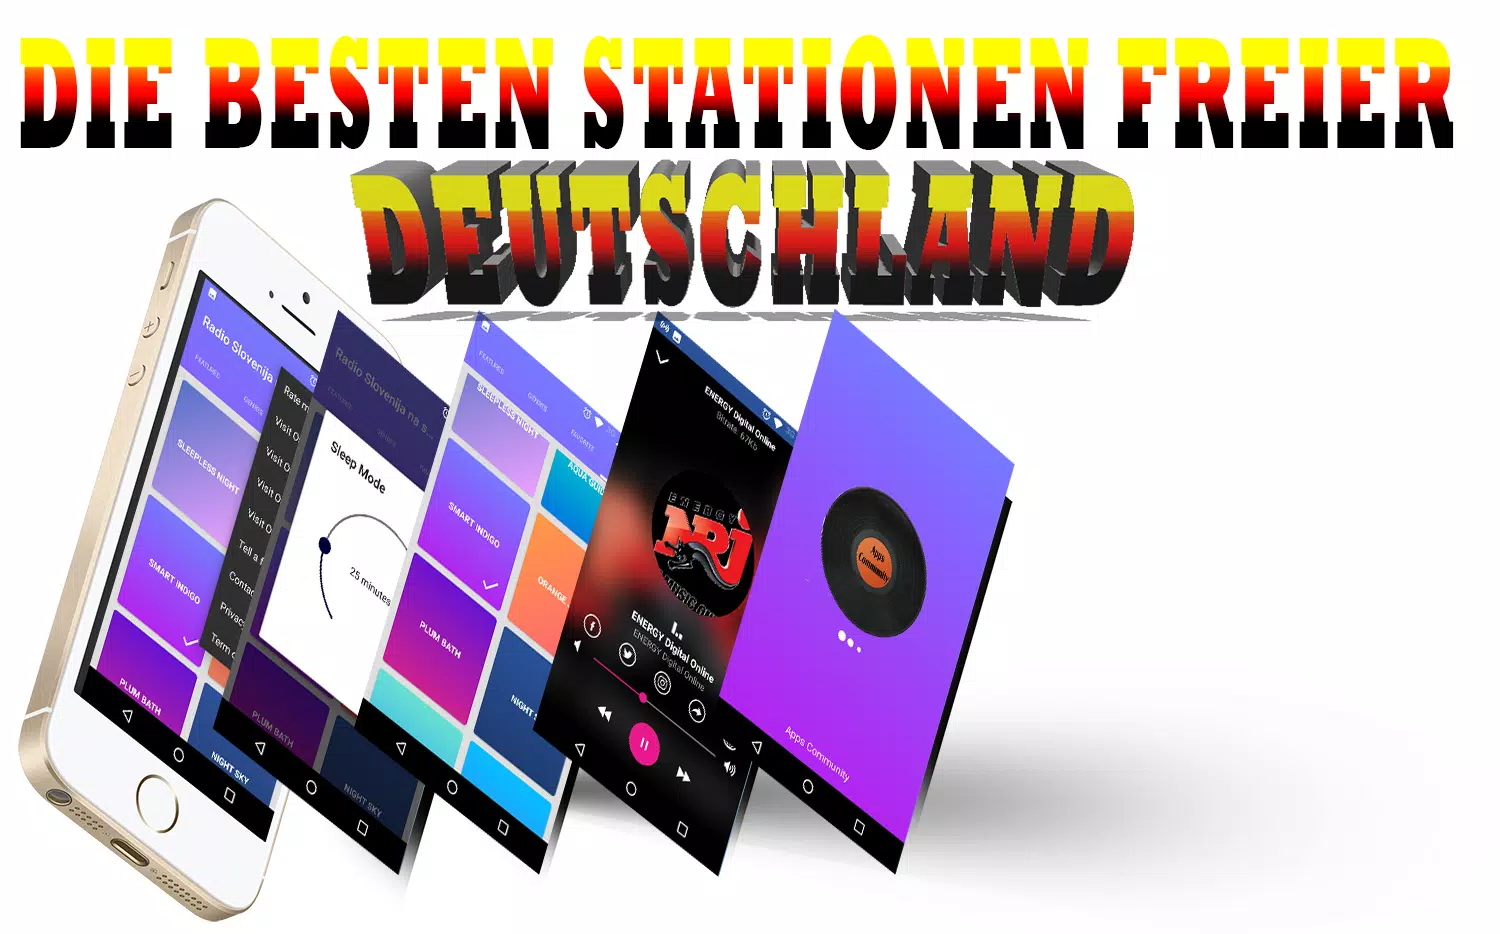 Radio BERLIN 88,8 vom rbb Online for Android - APK Download